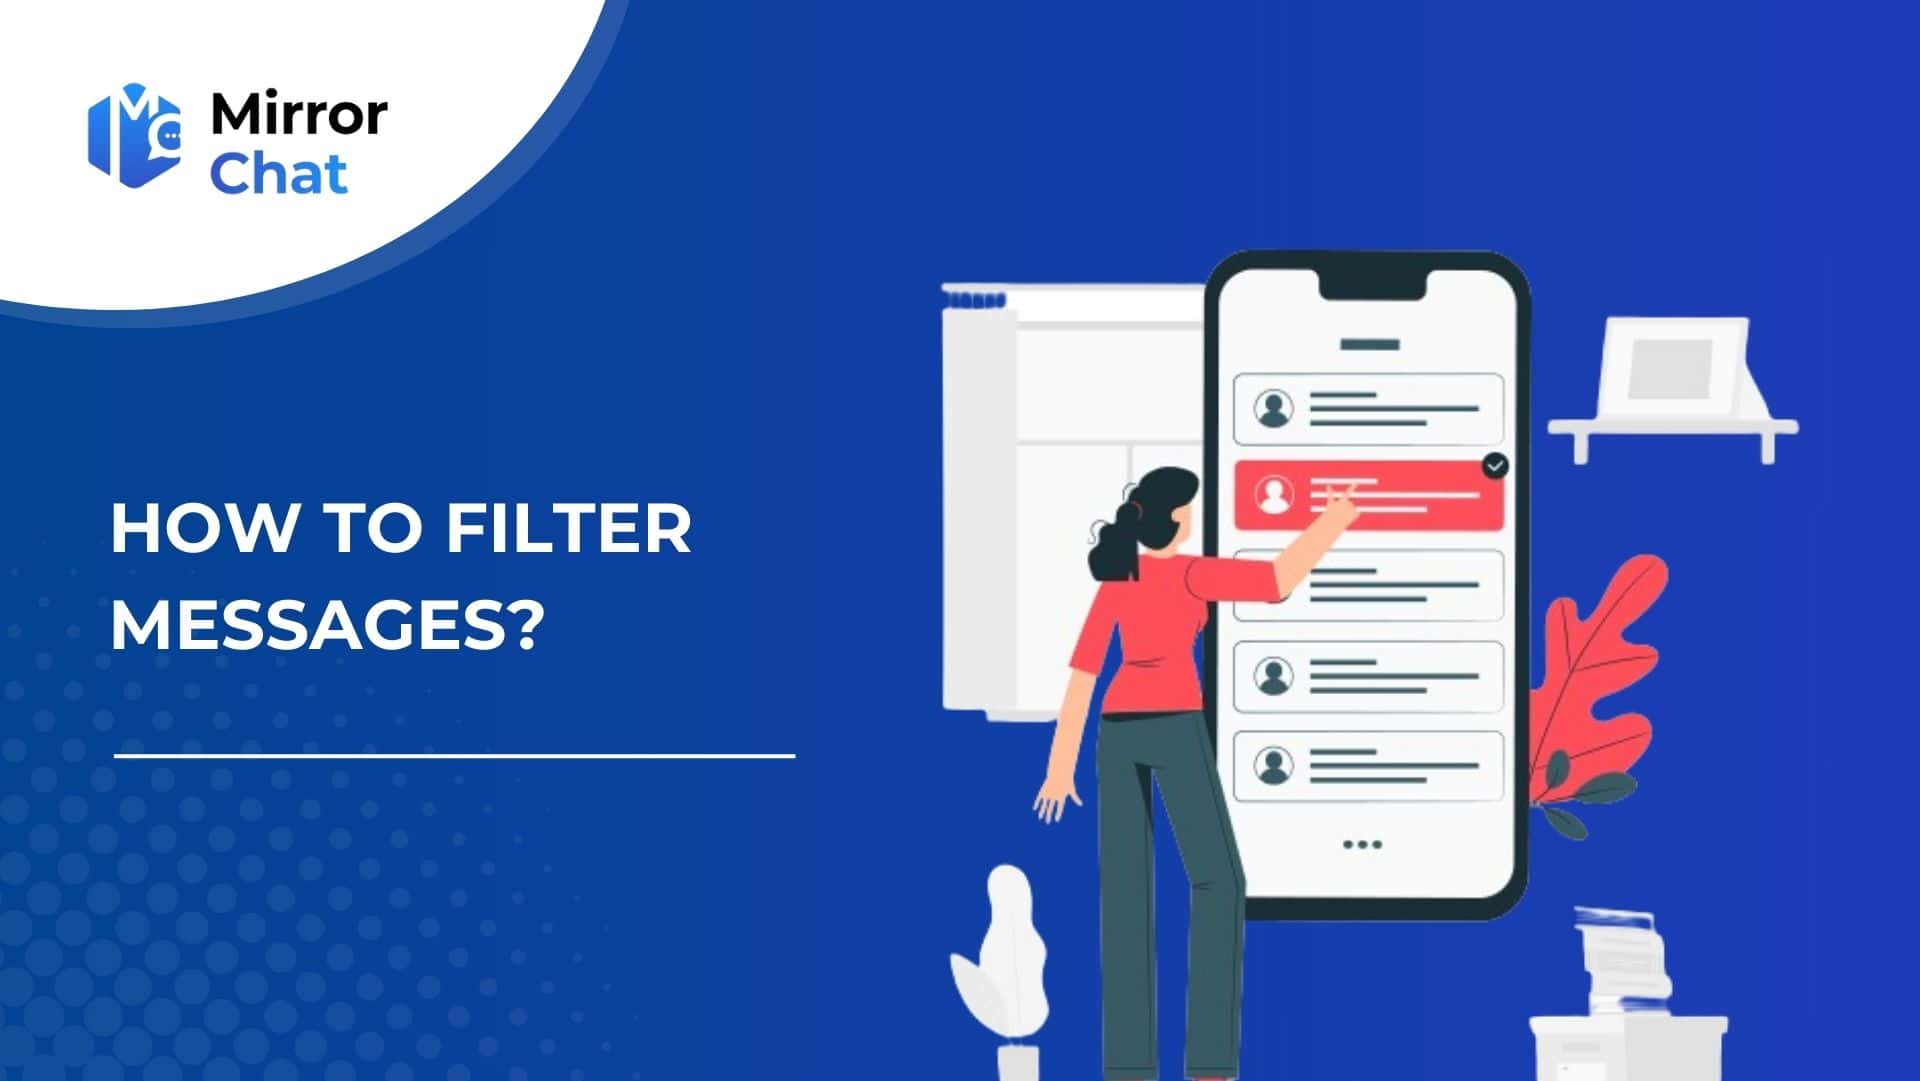 MirrorChat – How to filter messages?